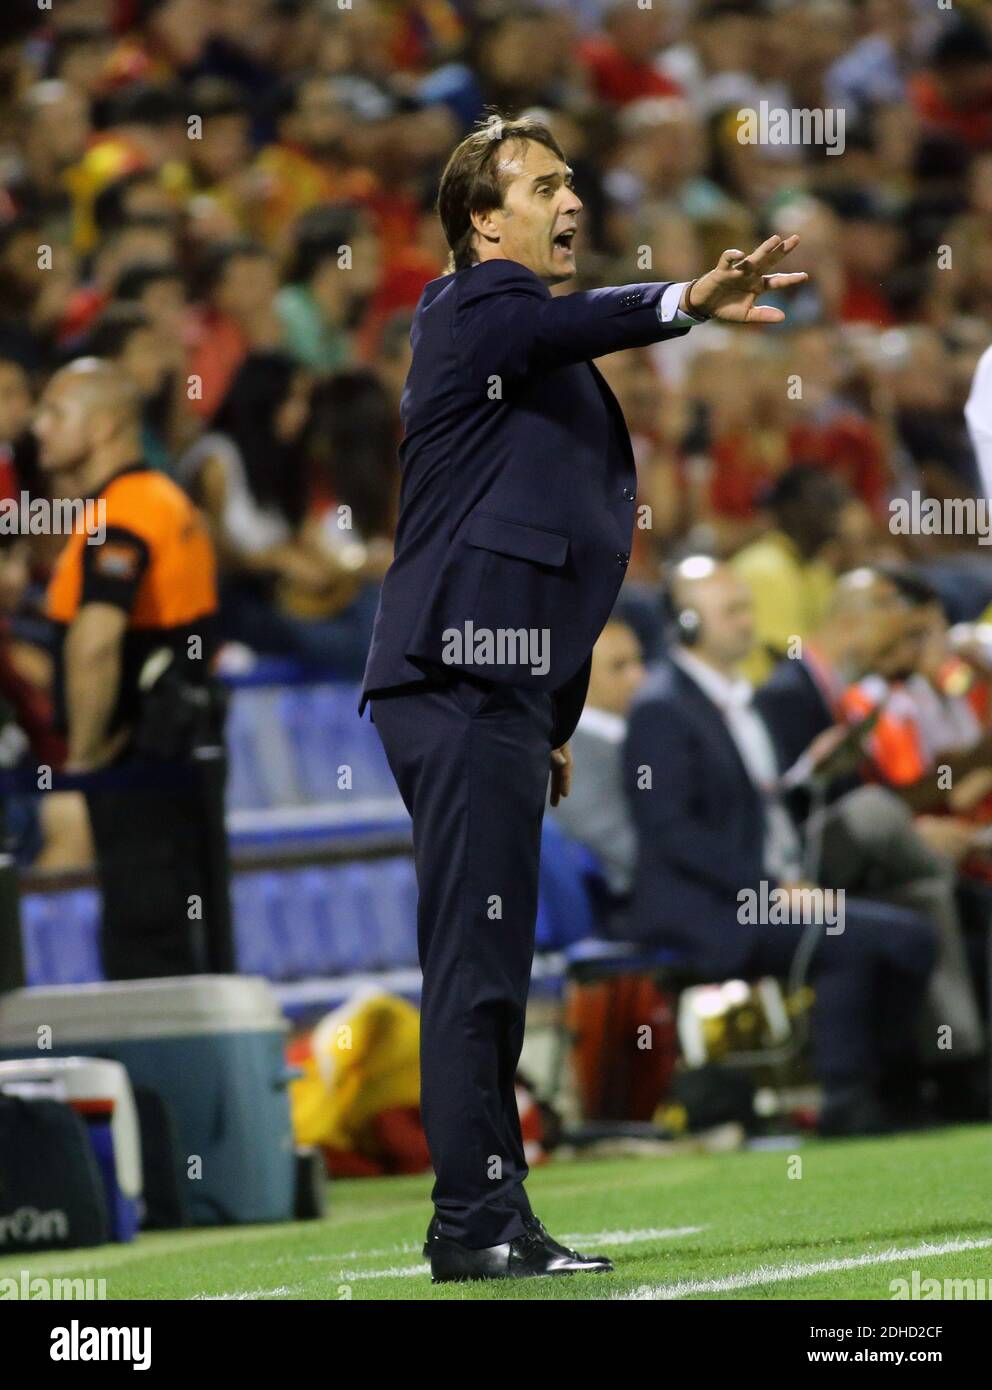 Julen Lopetegui, the coach of Spain in action during the World Cup qualification match between Spain vs Albania in Alicante, Spain, on October 06, 2017. Photo by Giuliano Bevilacqua/ABACAPRESS.COM Stock Photo